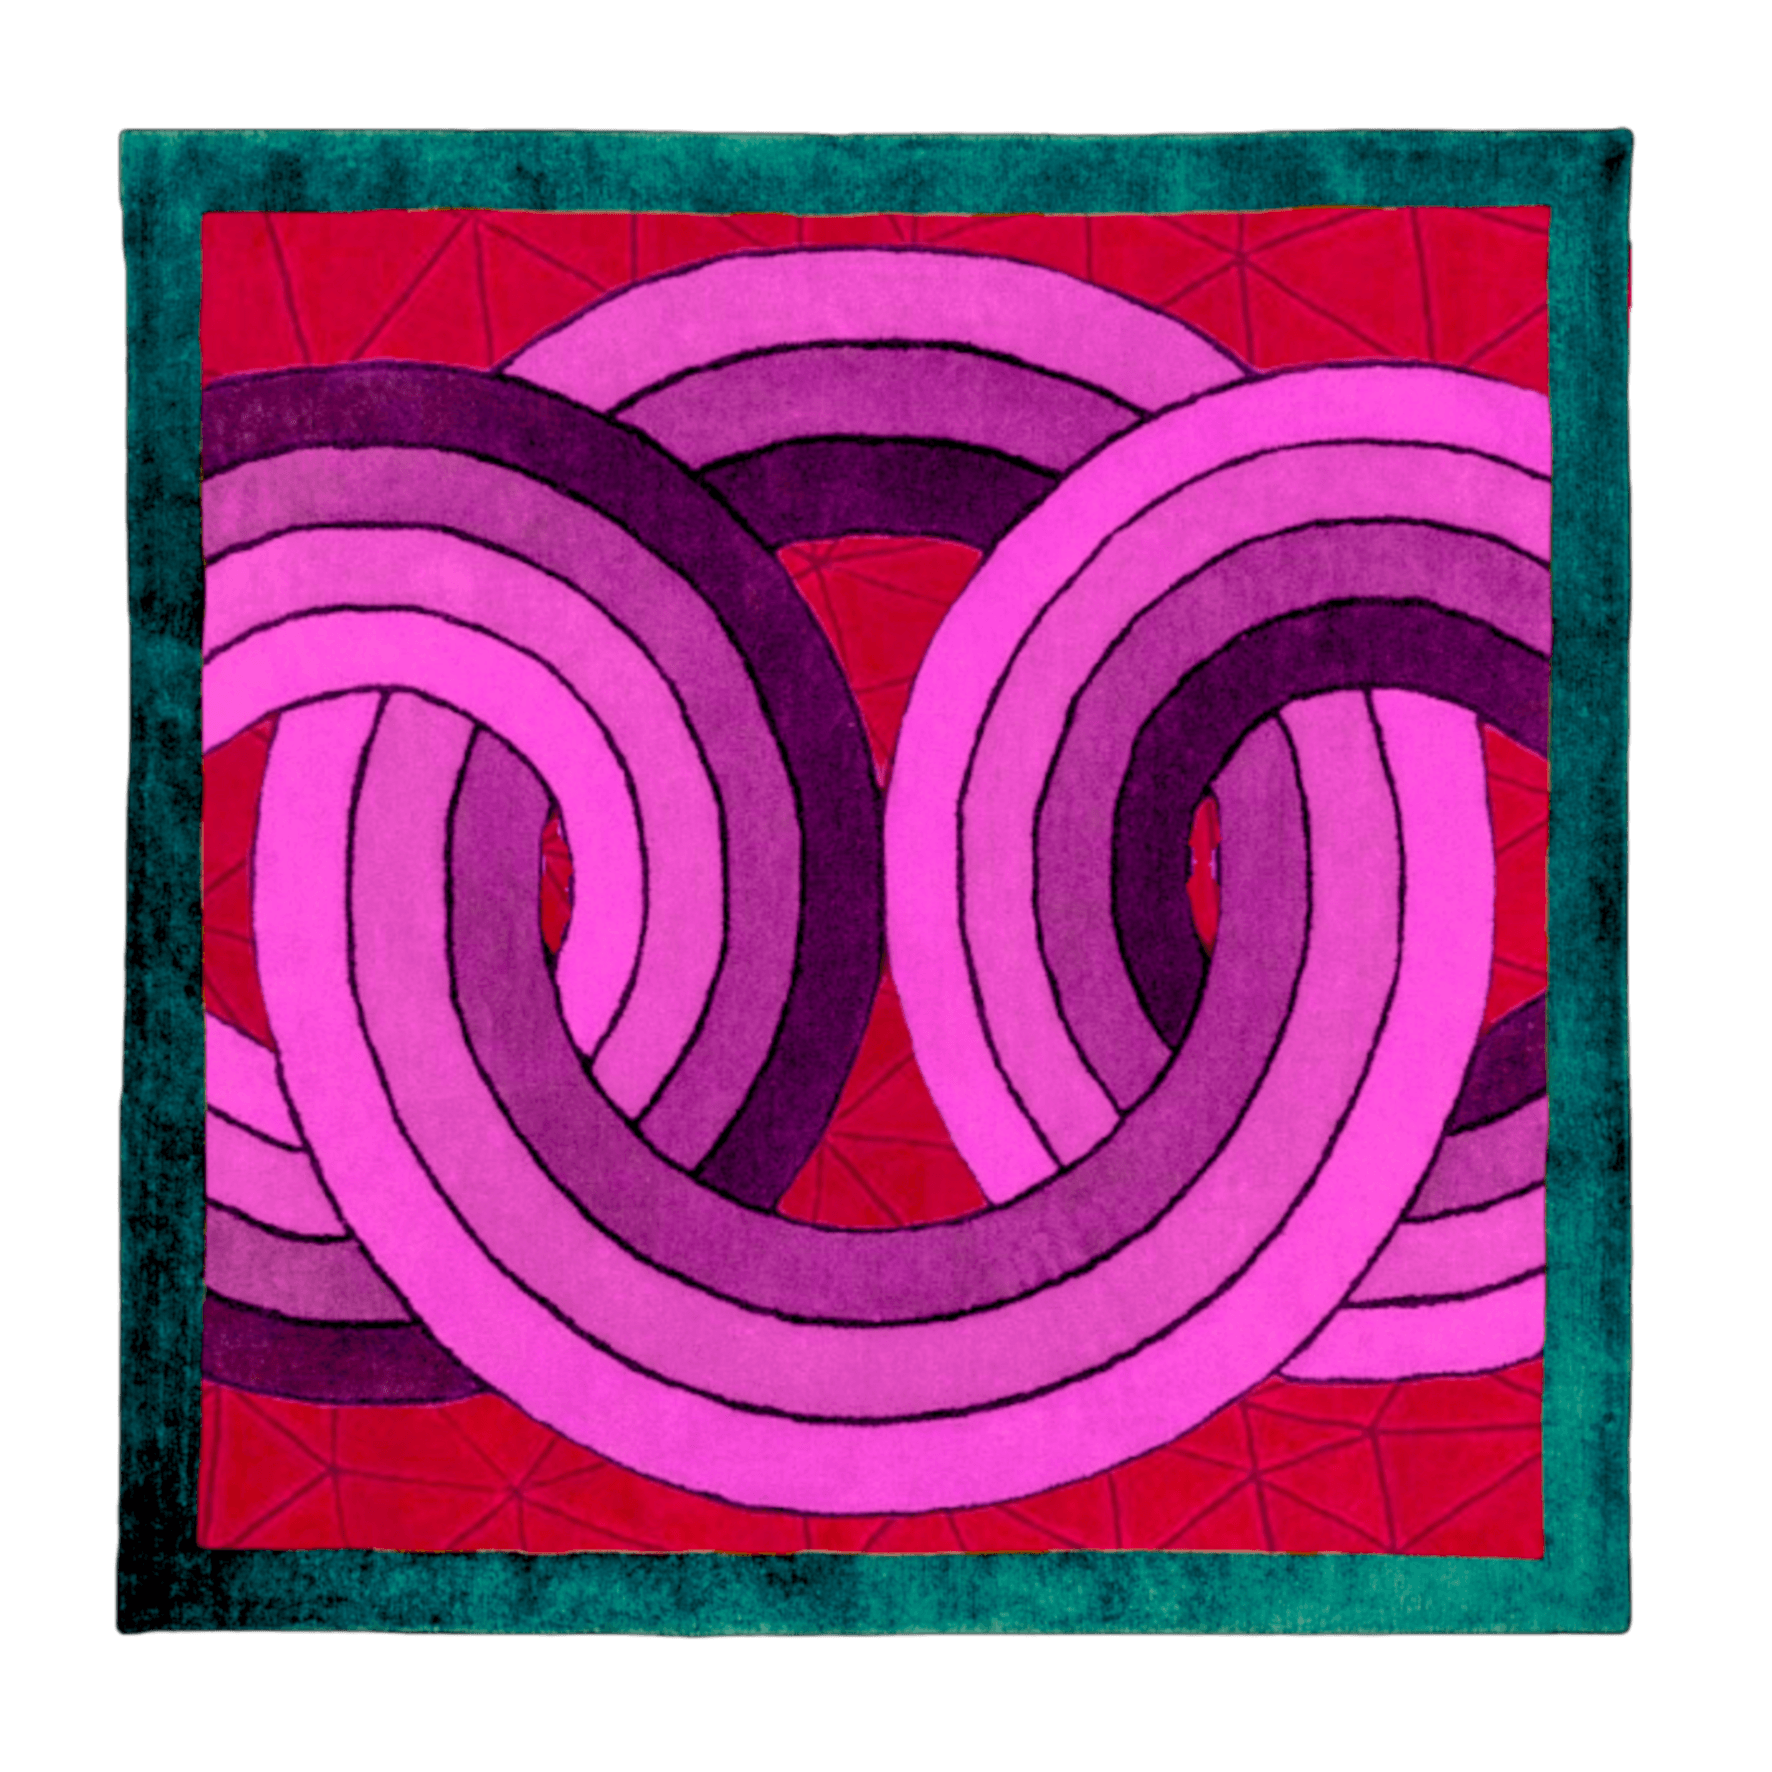 Maia Knotted Circles on Square Hand Tufted Wool Rug - Purple/Cream Maia Knotted Circles on Square Hand Tufted Wool Rug - Green Maia Knotted Circles on Square Hand Tufted Wool Rug - Green